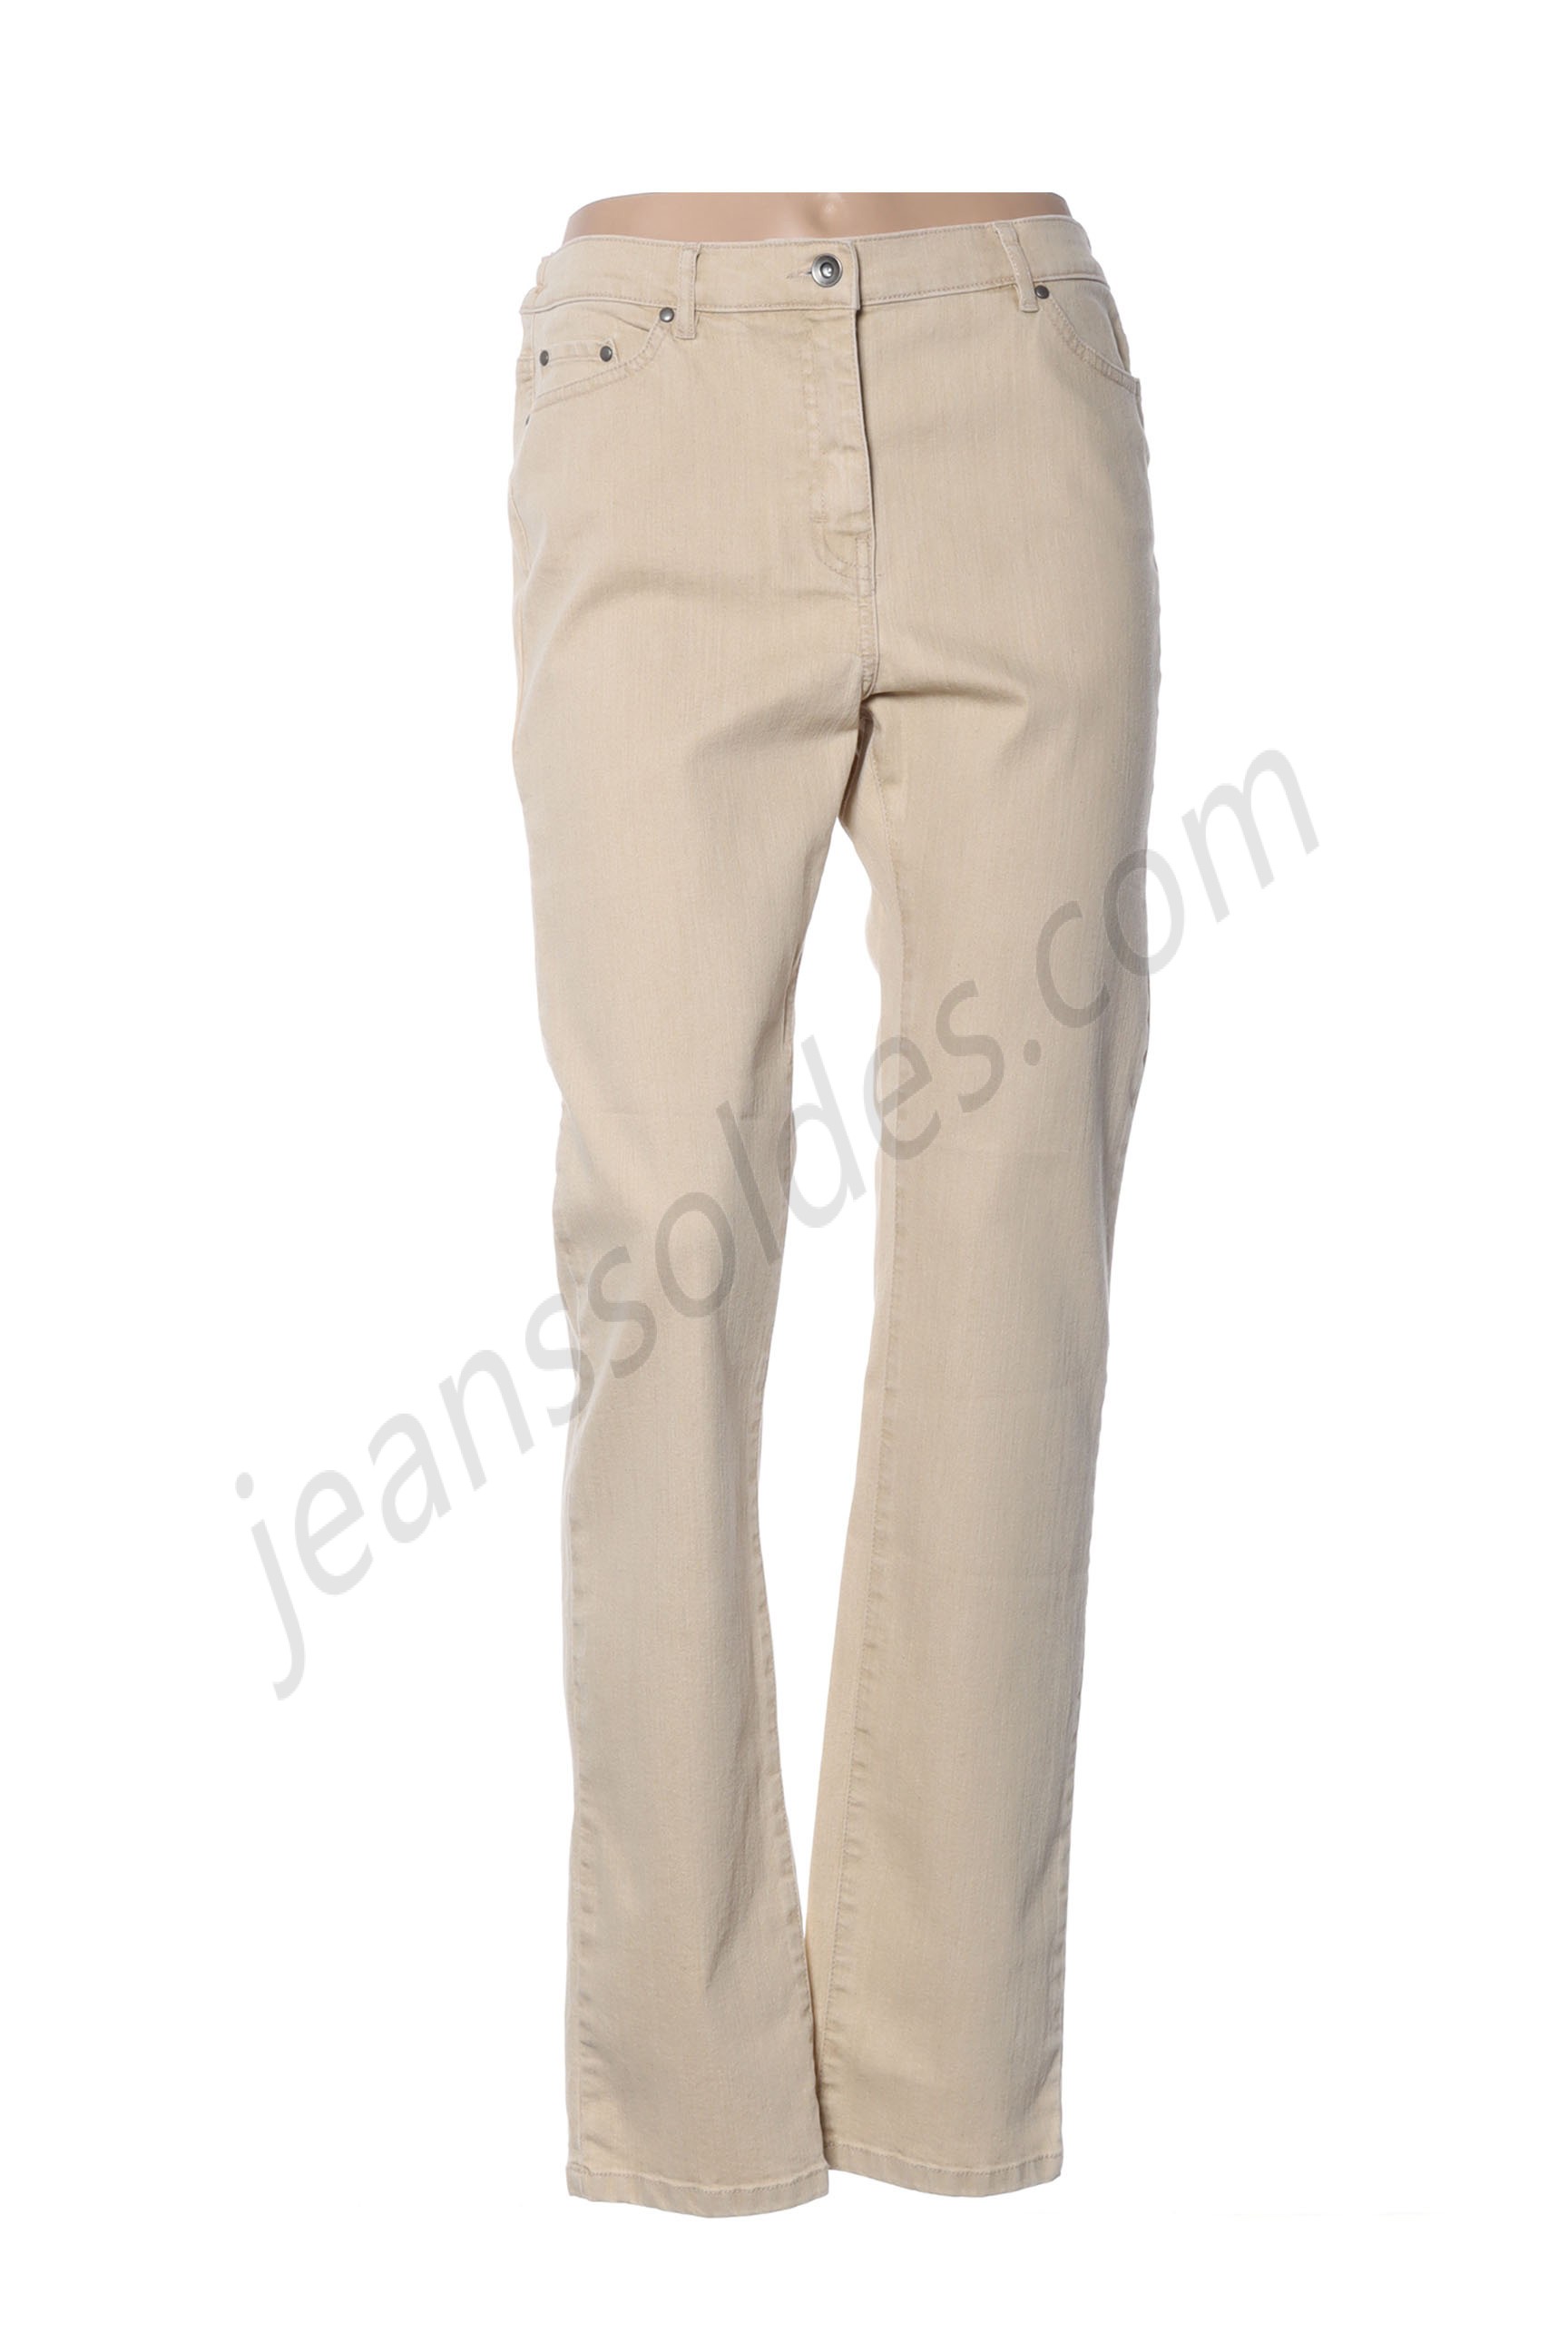 anne kelly-Jeans coupe slim prix d’amis - anne kelly-Jeans coupe slim prix d’amis